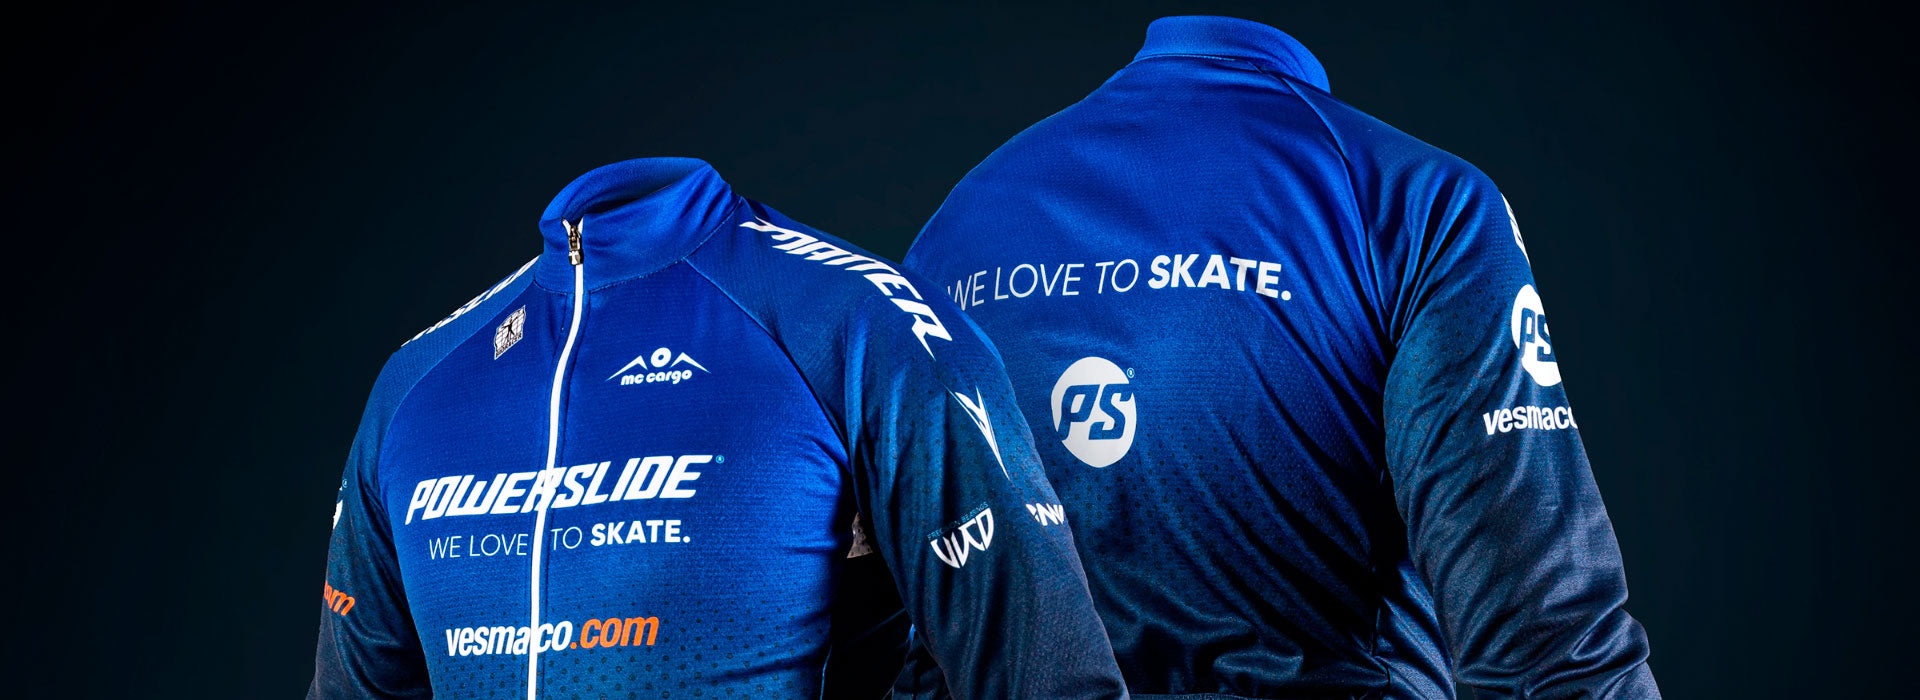 The front and back of a Powerslide long sleeve shirt for inline speed skating